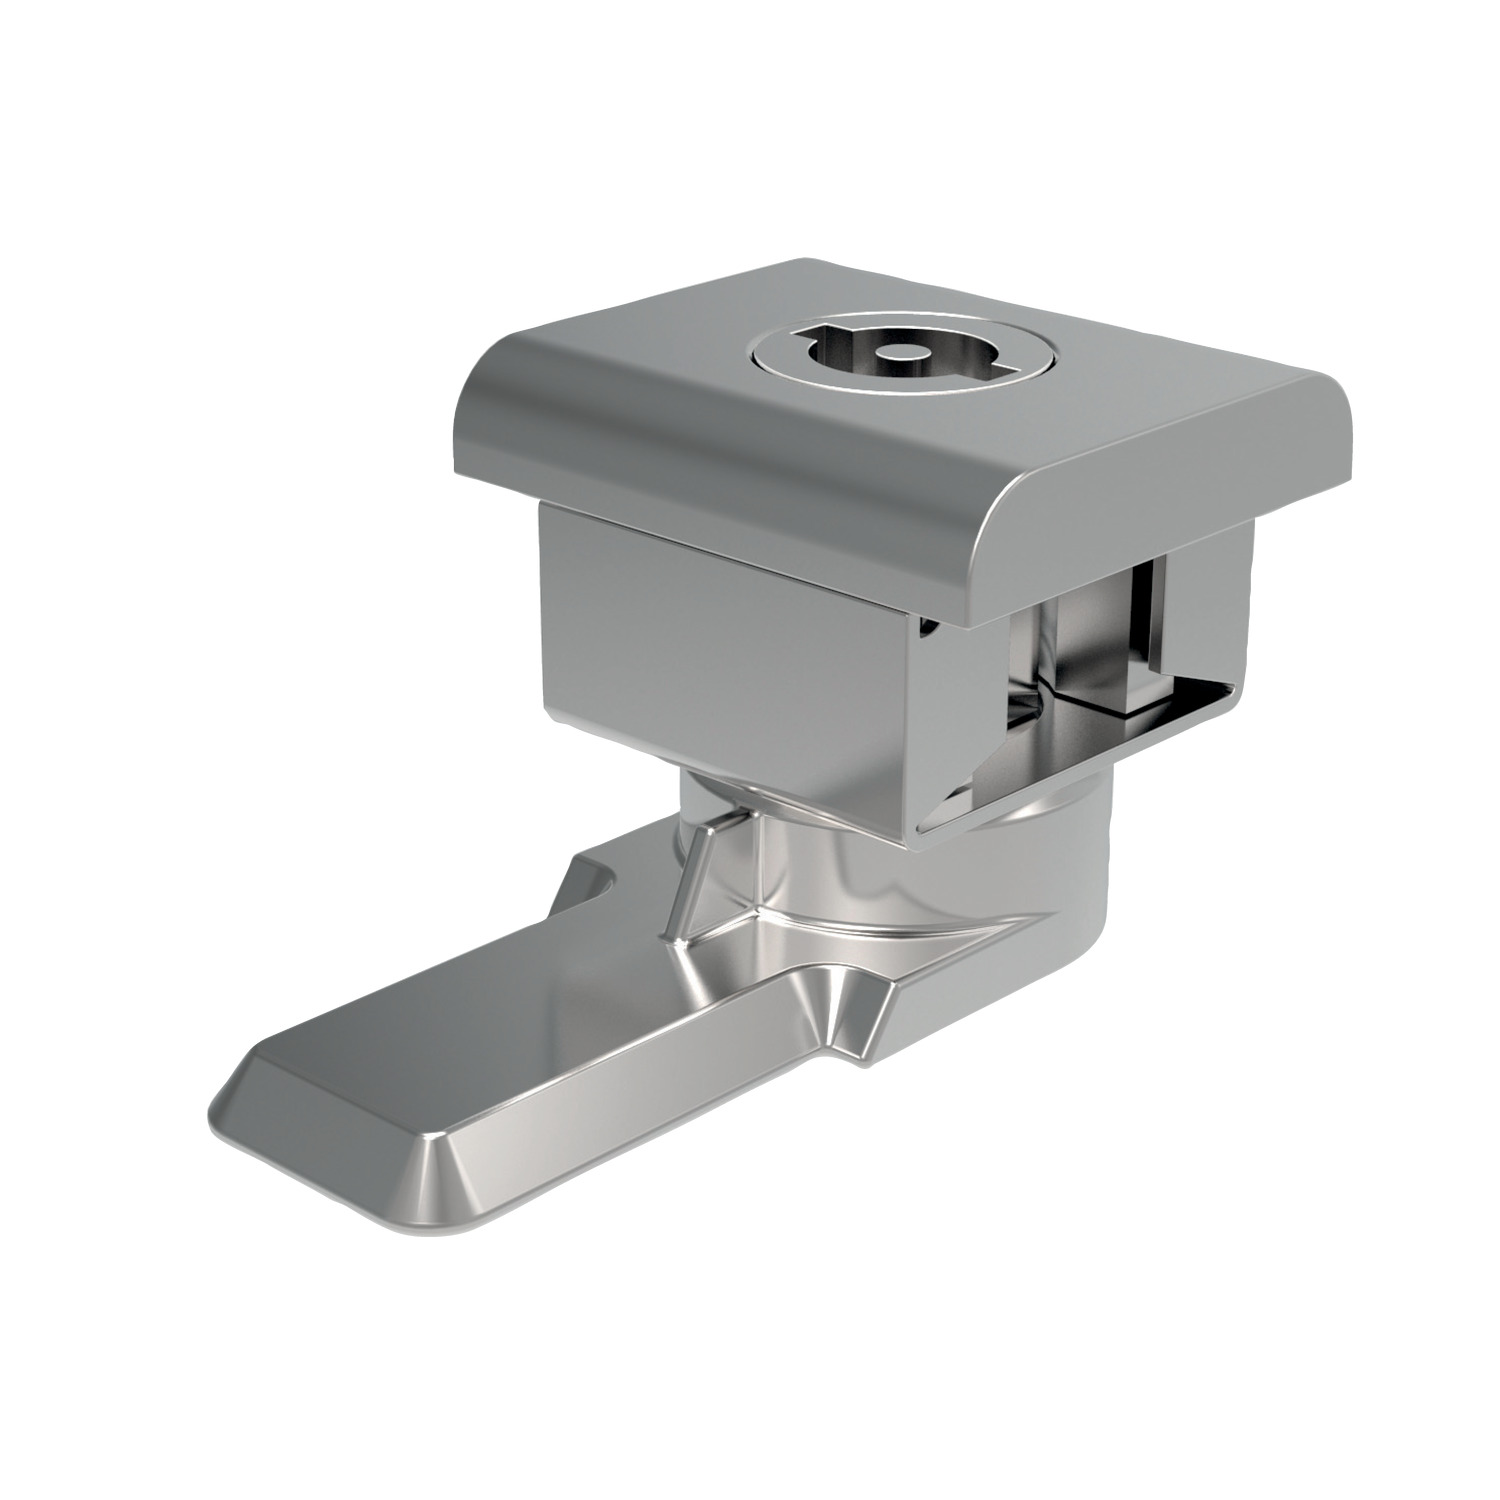 A1506.AW0036 Panel Latches insert driver - fixed grip - Stainless steel